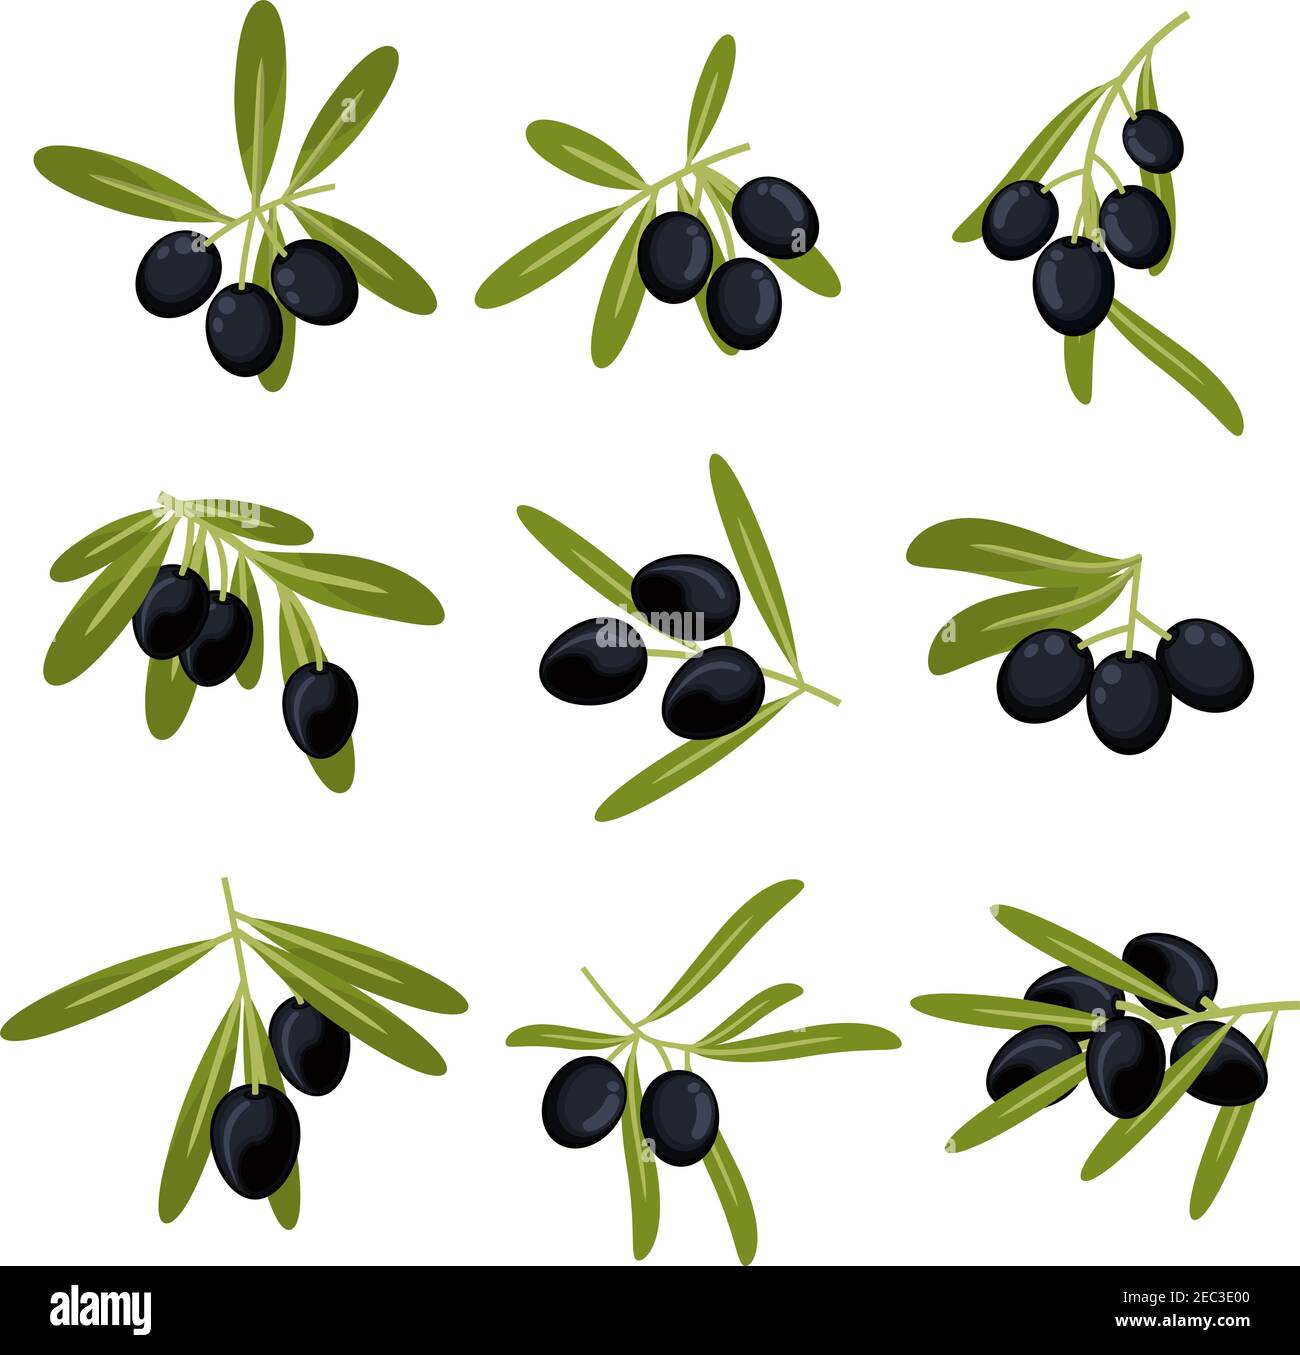 Ripe olive berries on branch icon Royalty Free Vector Image